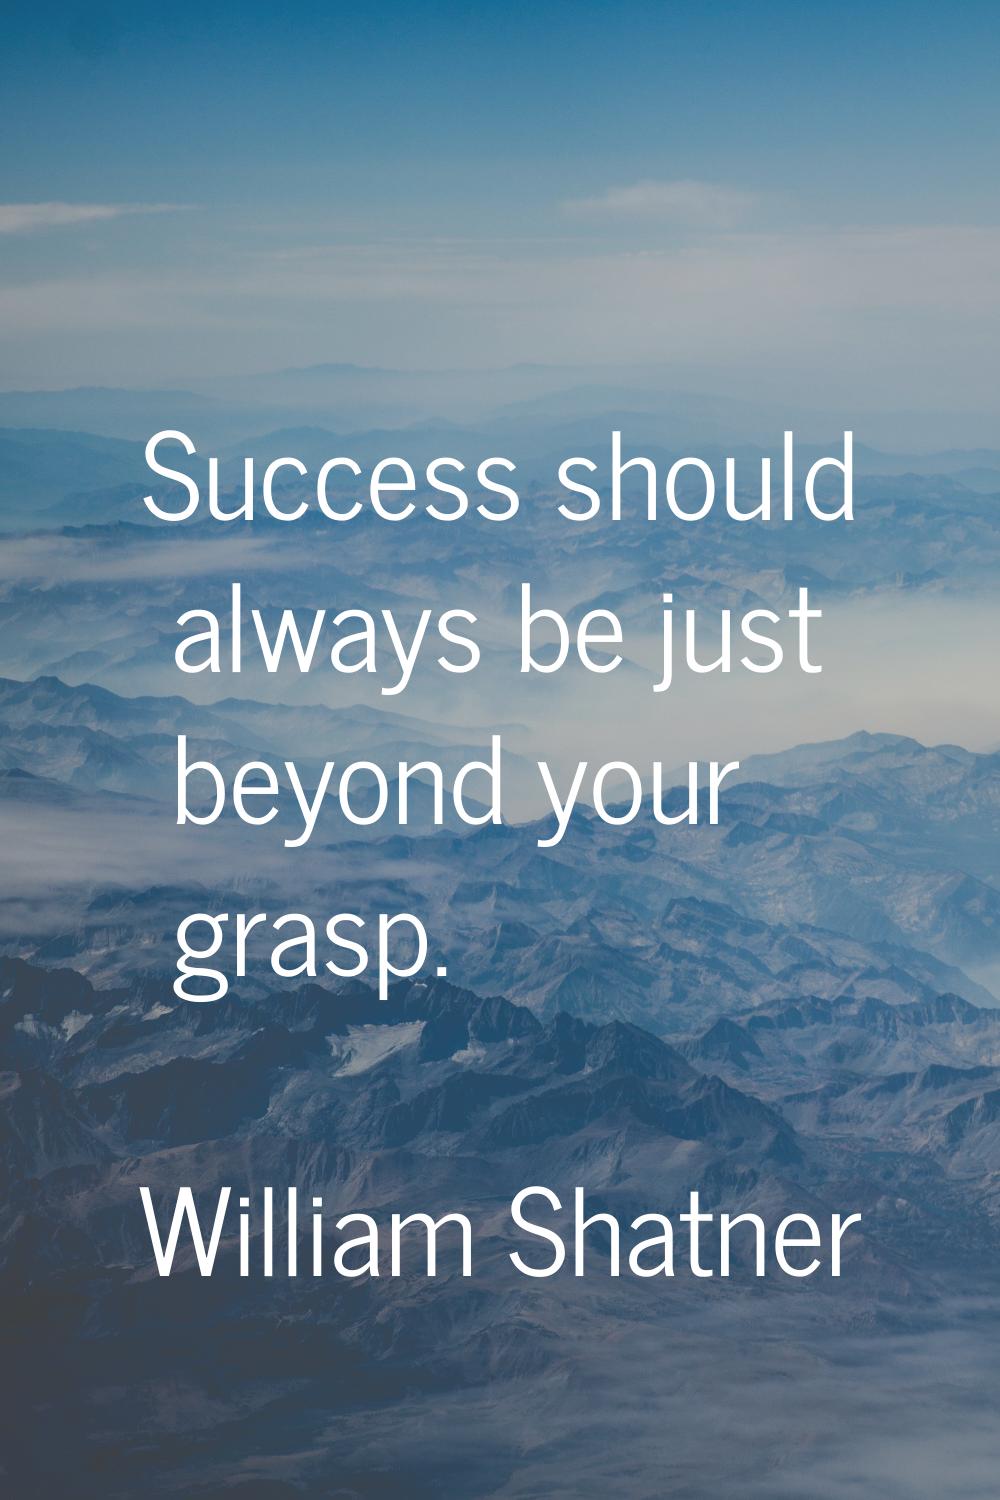 Success should always be just beyond your grasp.